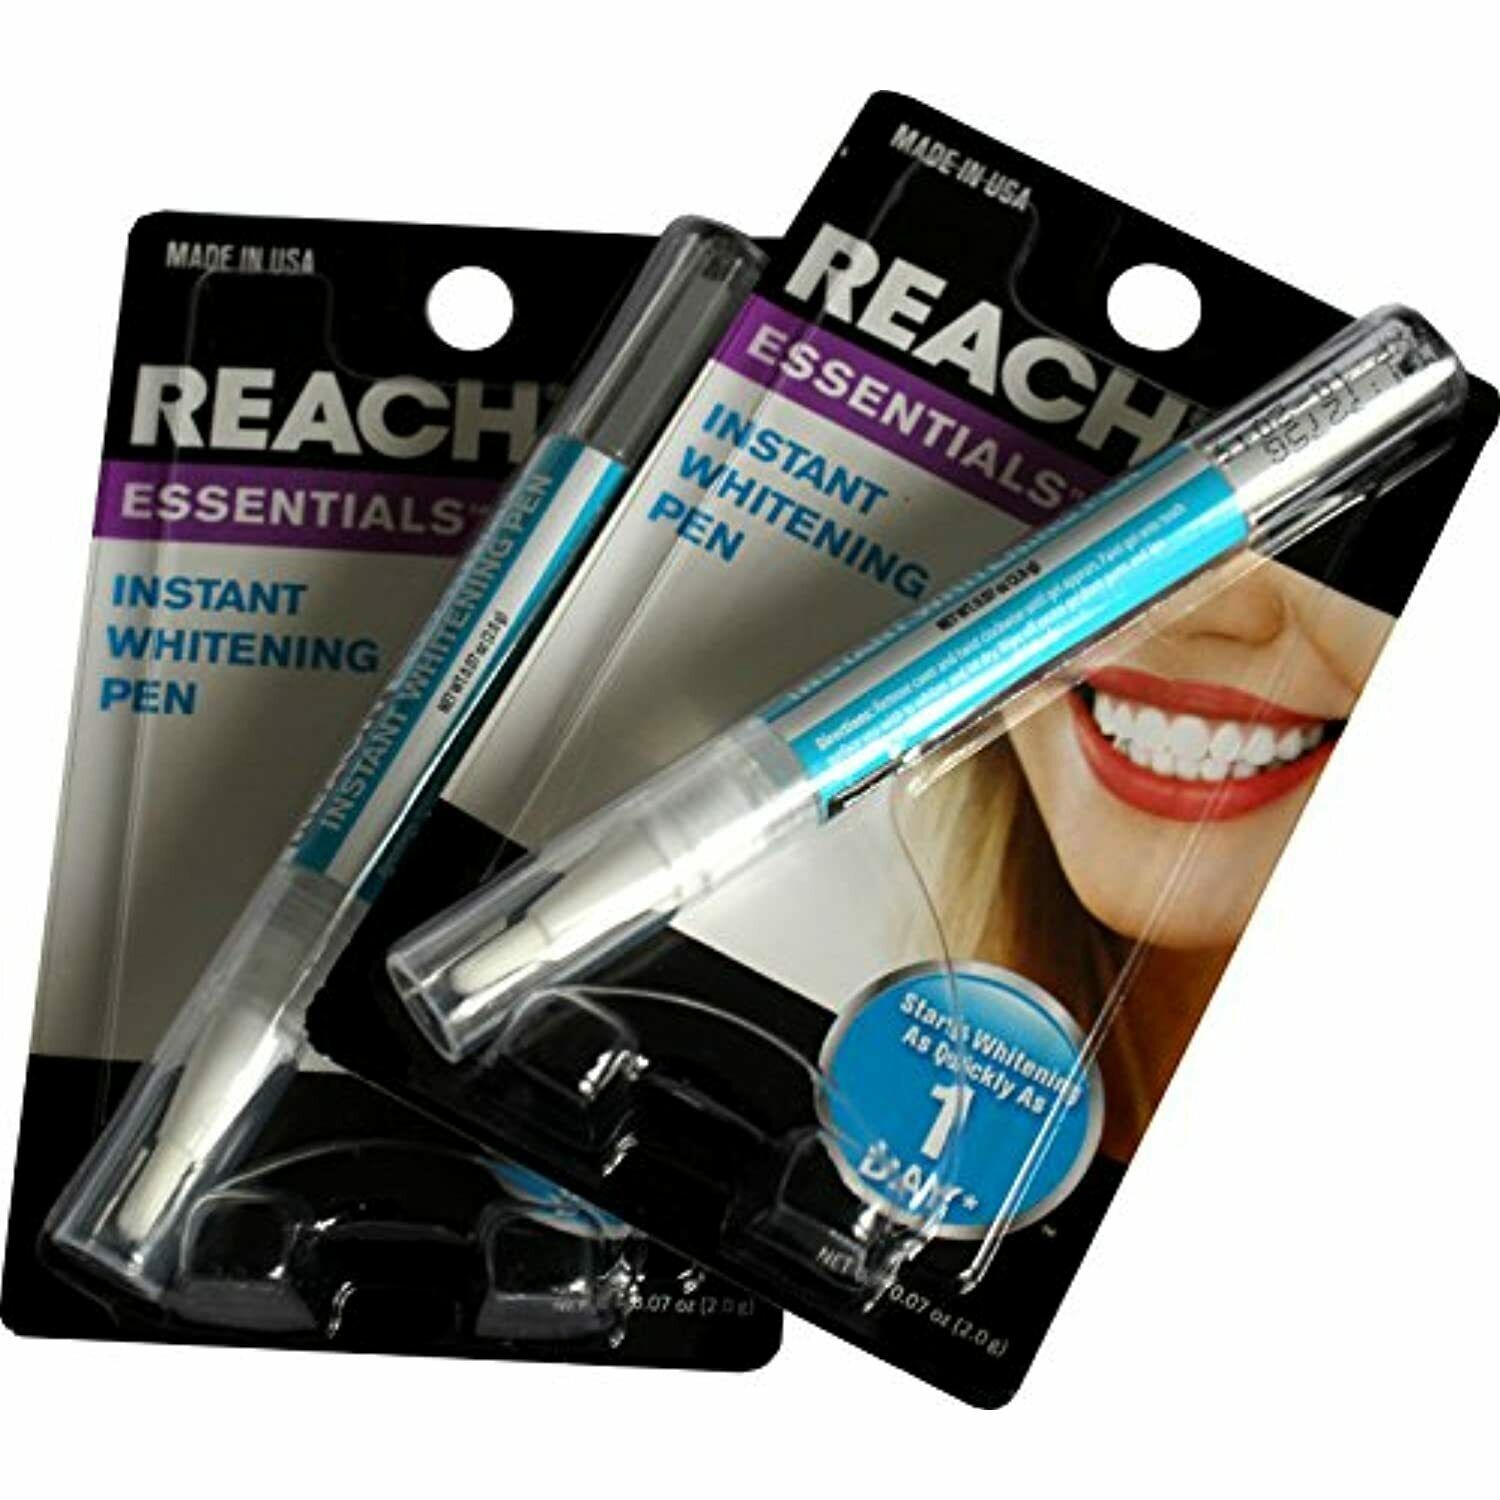 Reach 2 Pack - Essentials Instant Teeth ning Pen White 0.14 Ounce (Pack of 2)